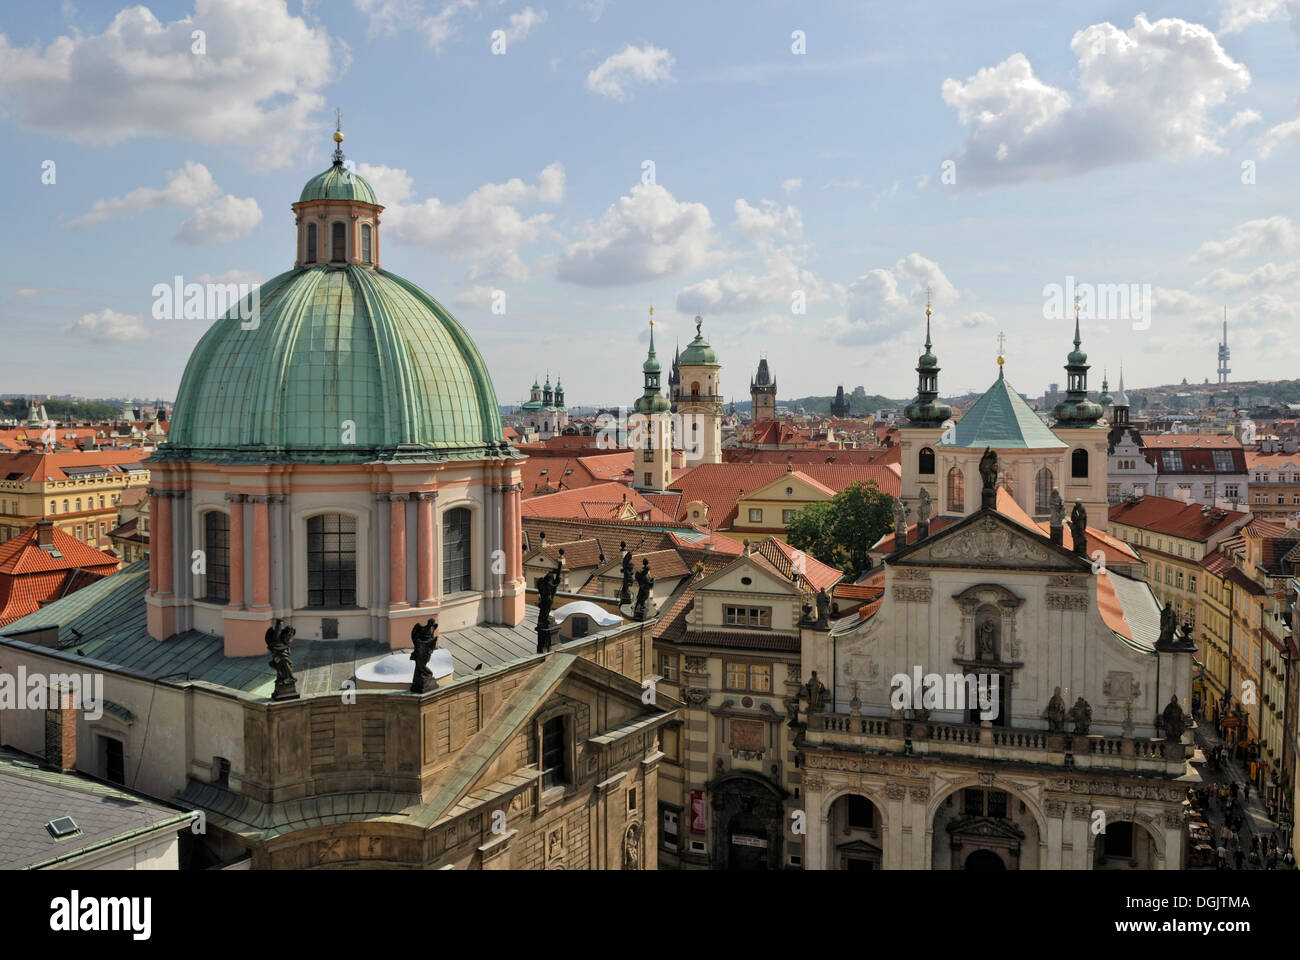 View from the Old Town Bridge Tower over the towers and roofs of Prague, Czech Republic, Europe Stock Photo